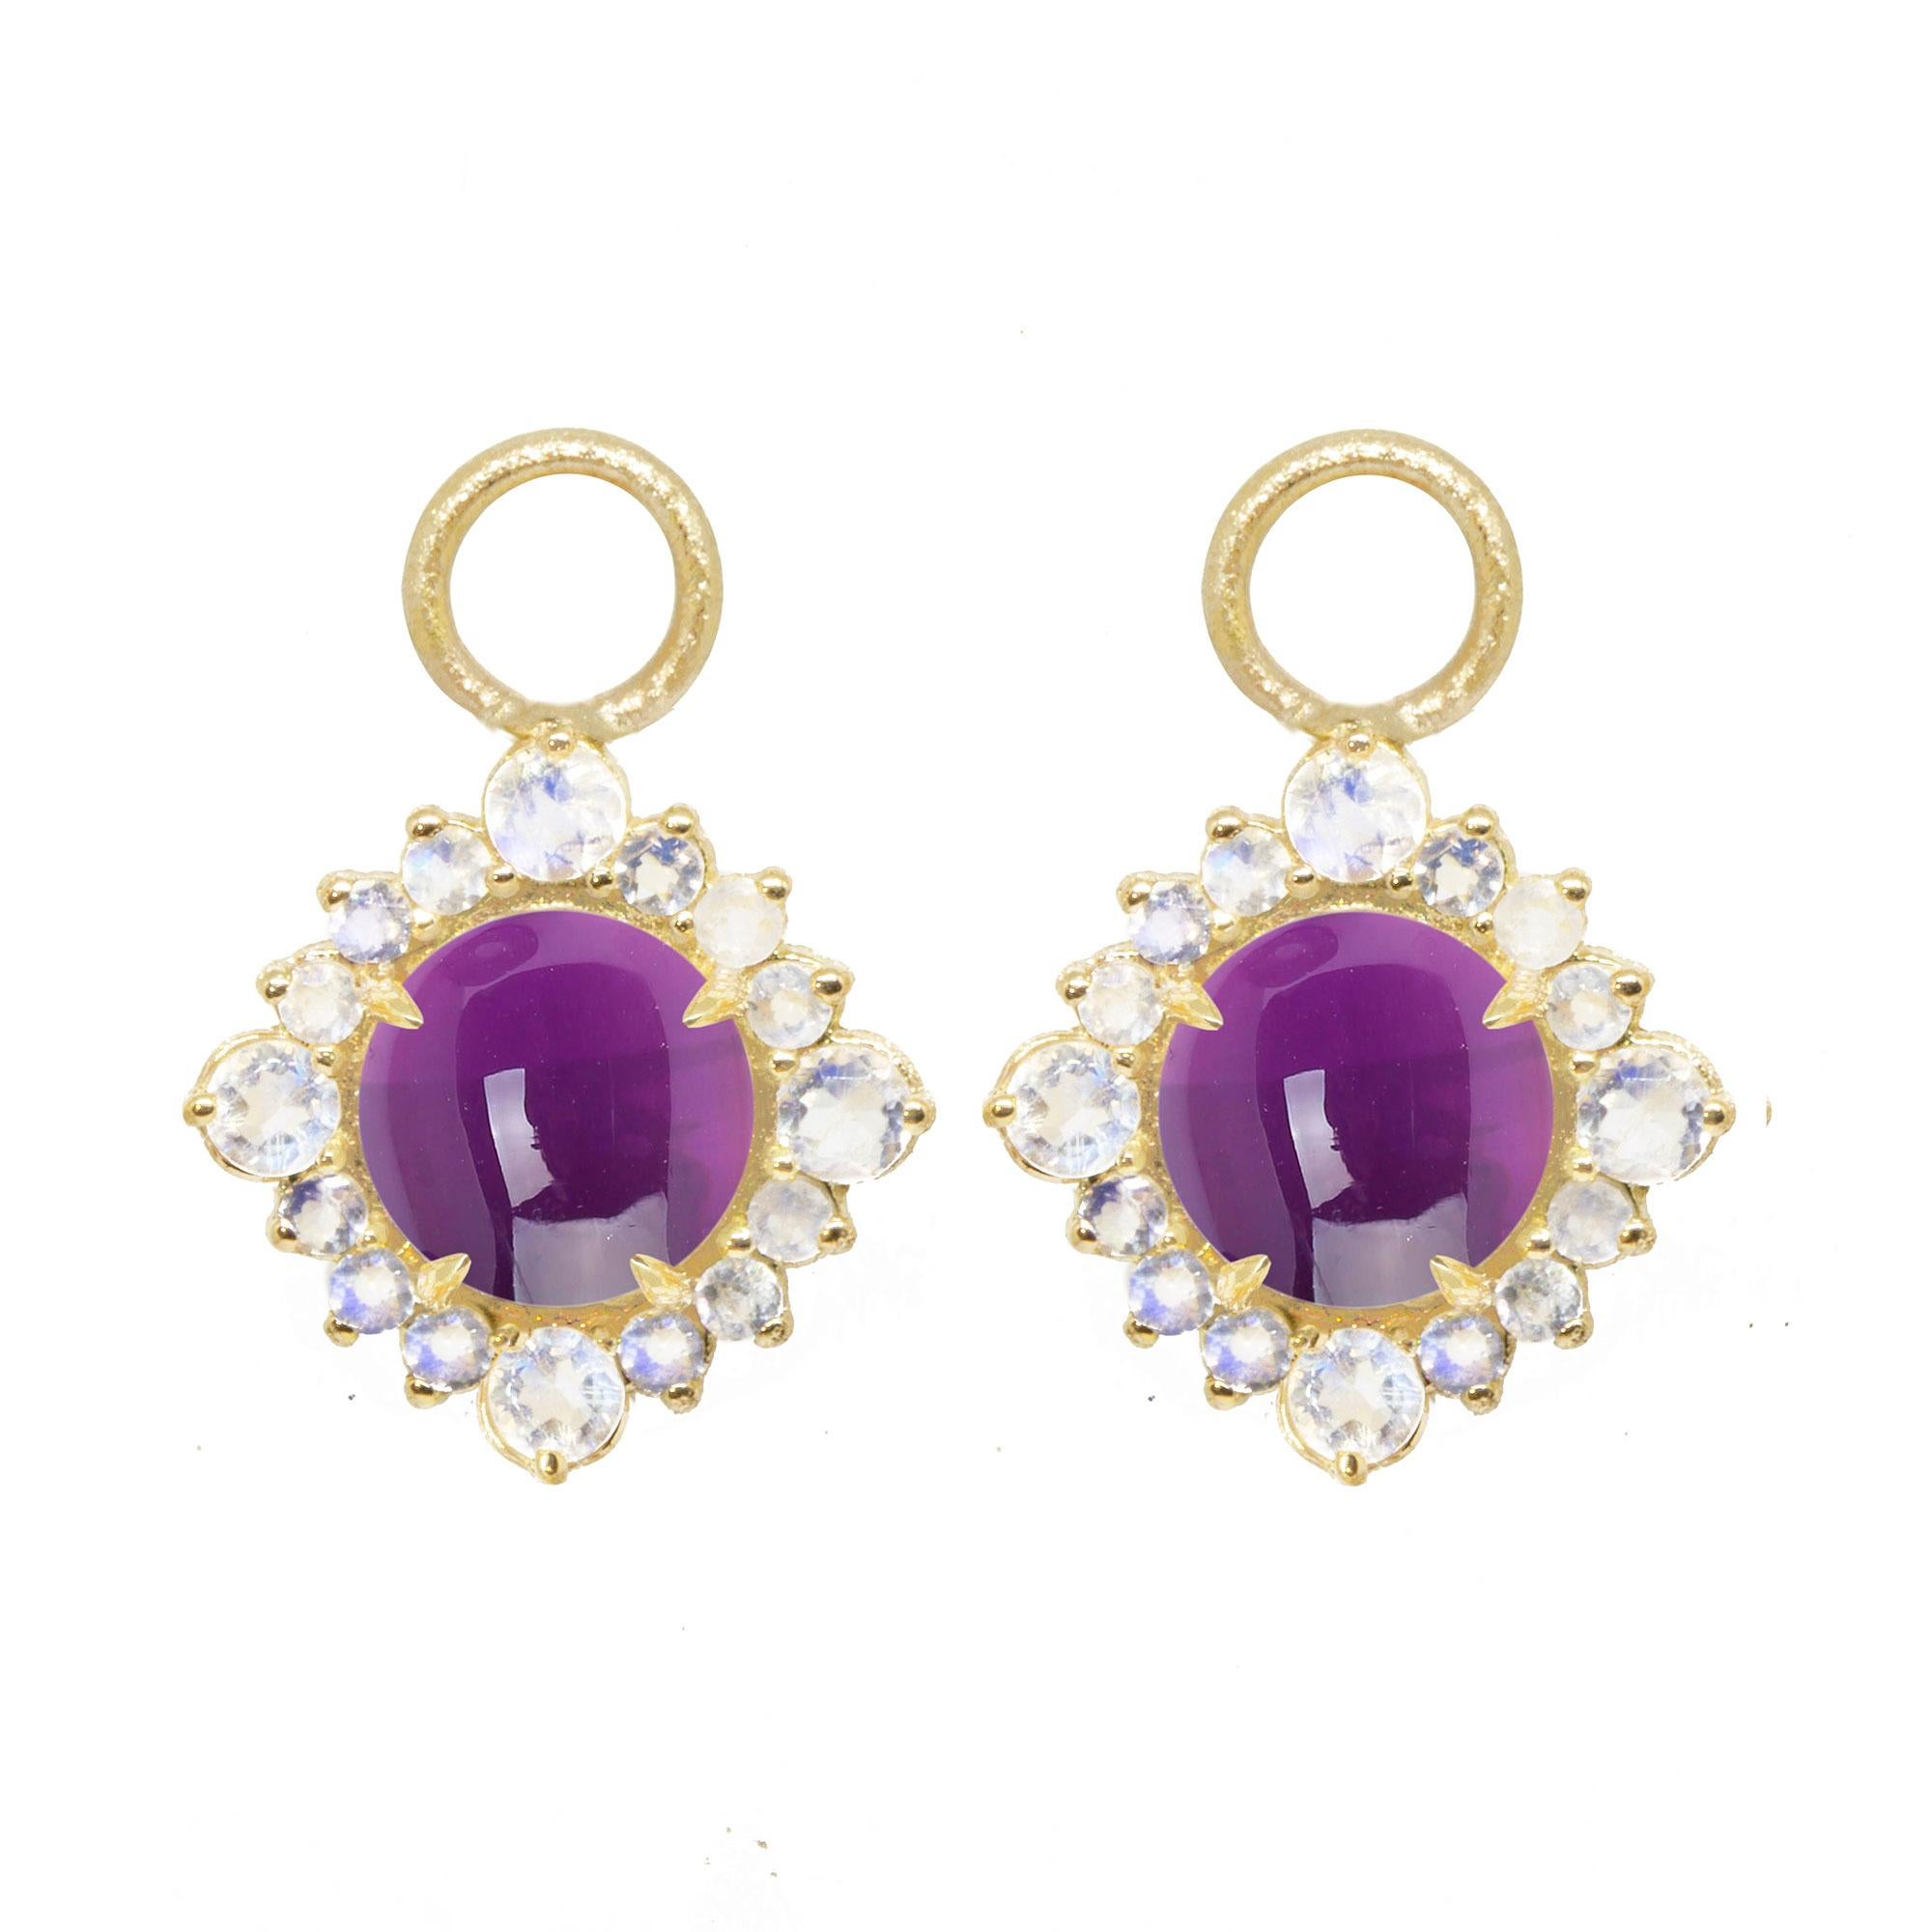 Our moonstone-accented Grace Gold Earring Charms are rimmed in gold, with a vivid amethyst gemstone at the center. Pair them with an hoop, mix them with any style, the Grace Silver Earring Charms made a great addition.

Hoops and charms are sold